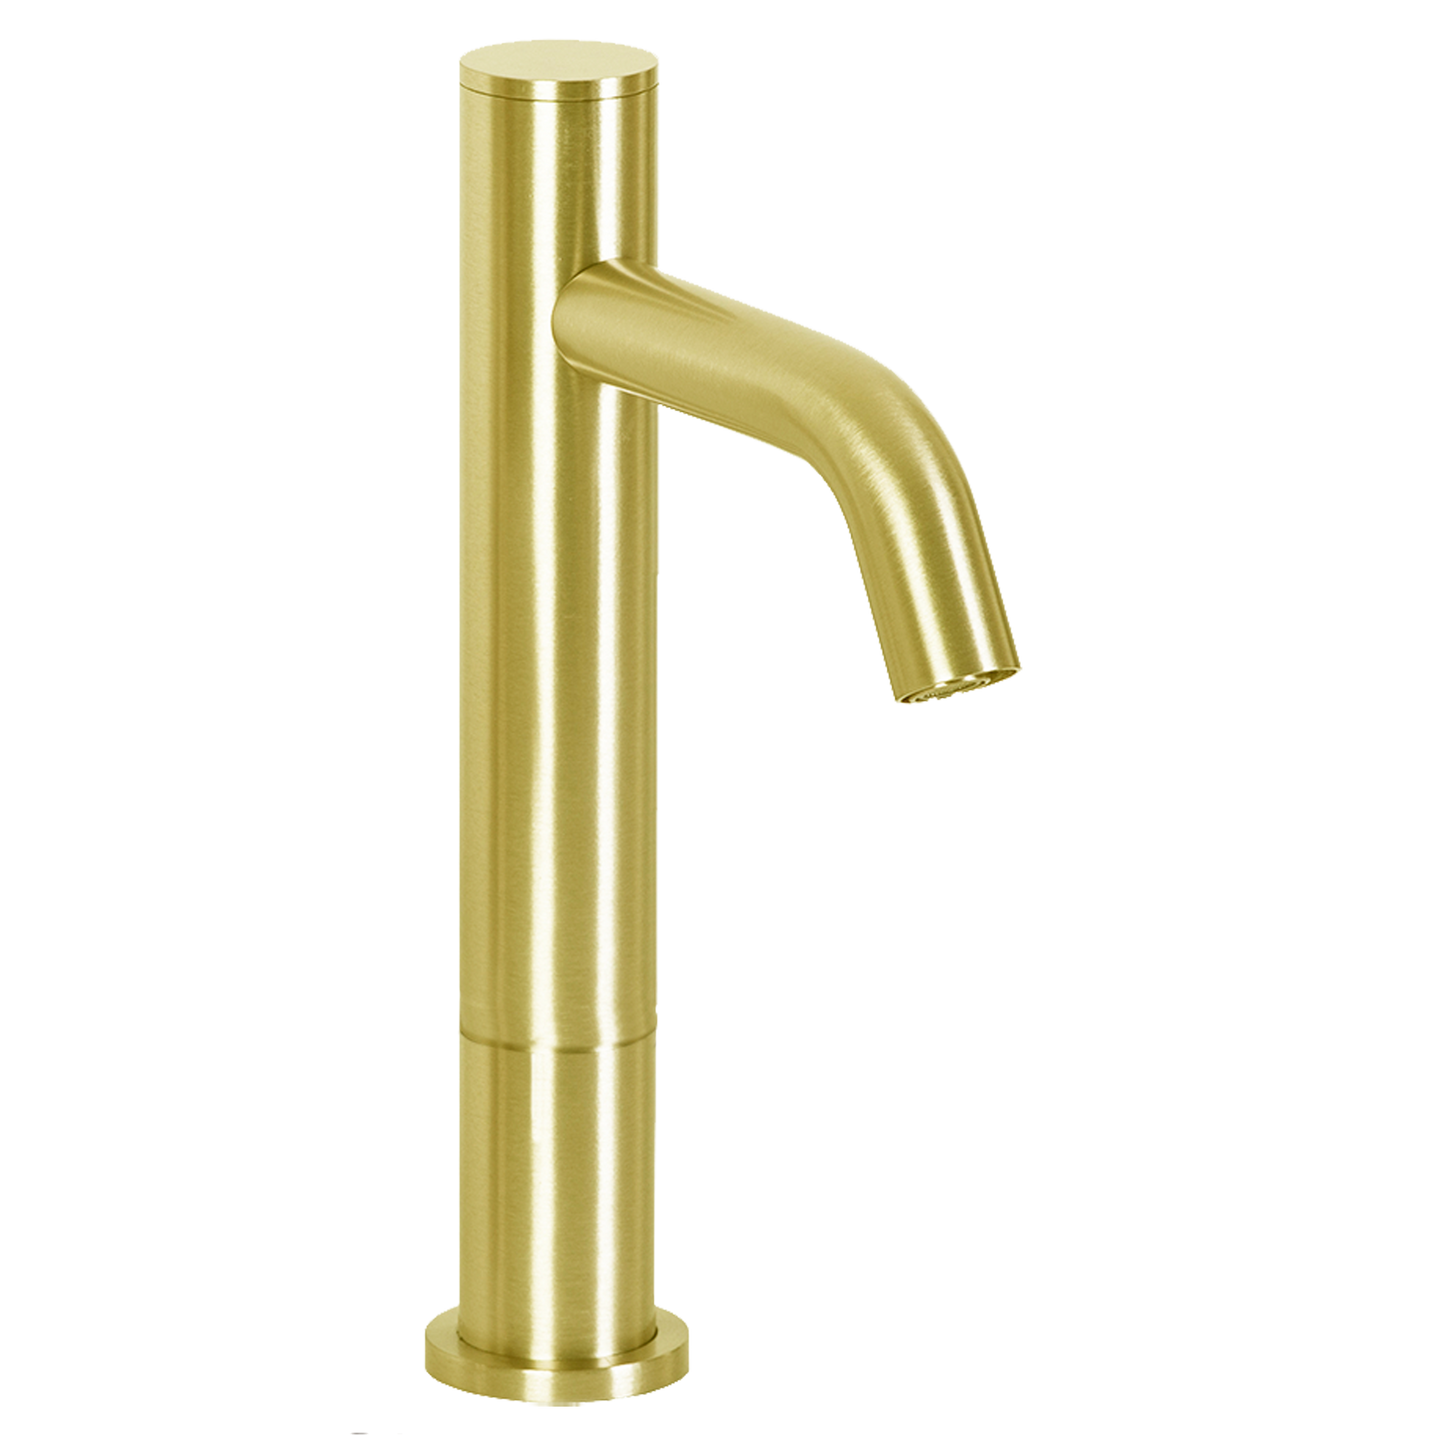 FA-3263 Automatic Faucet with 6” Spout Reach and 3” Riser In Satin Brass